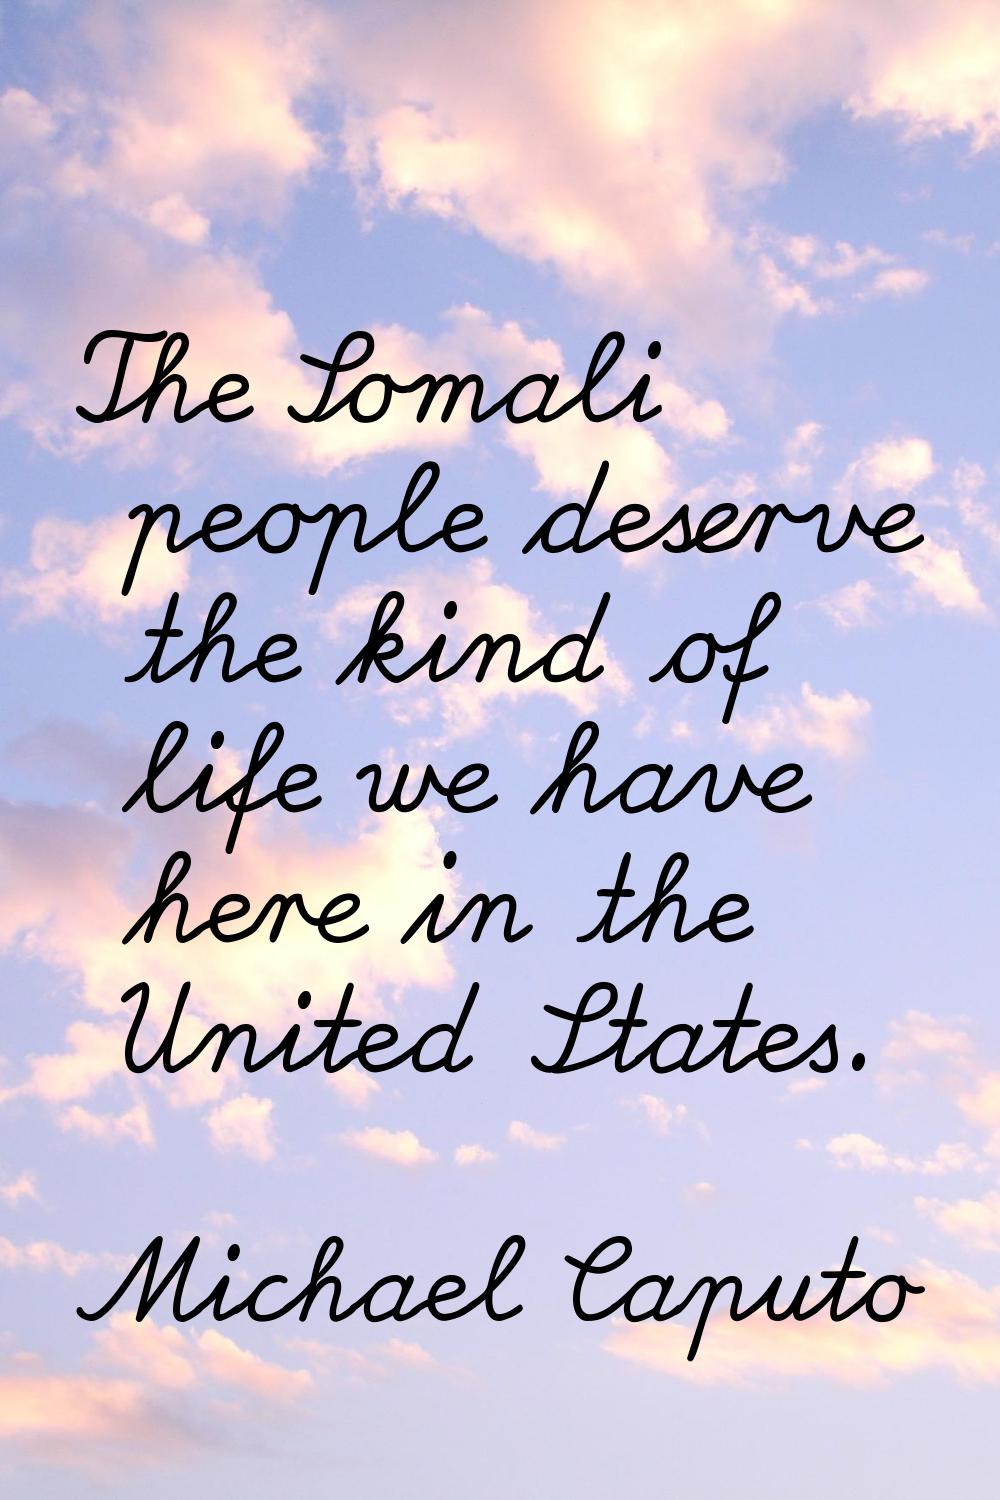 The Somali people deserve the kind of life we have here in the United States.